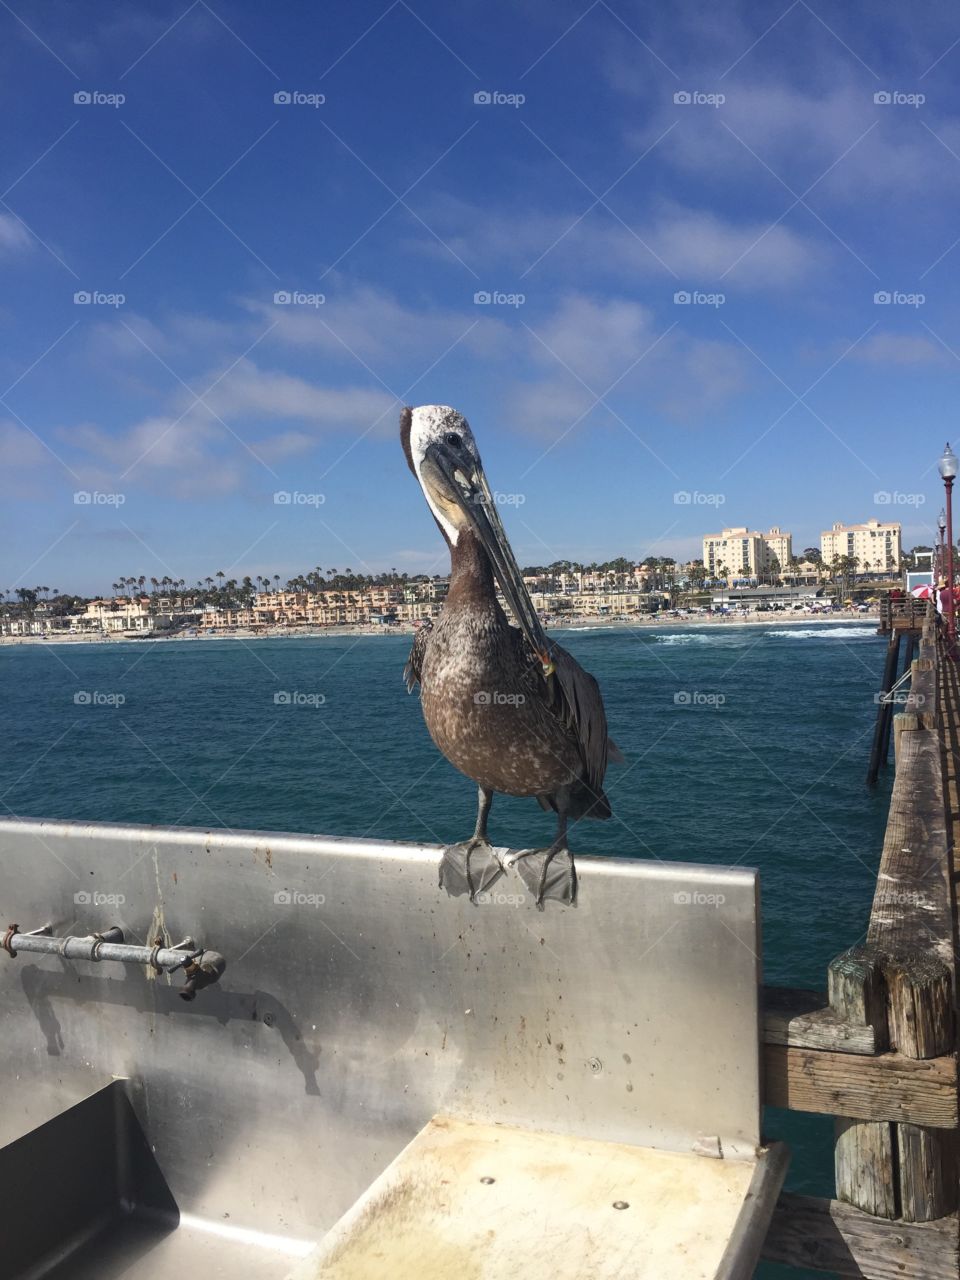 He became the most famous bird on the pier for about 20 minutes.